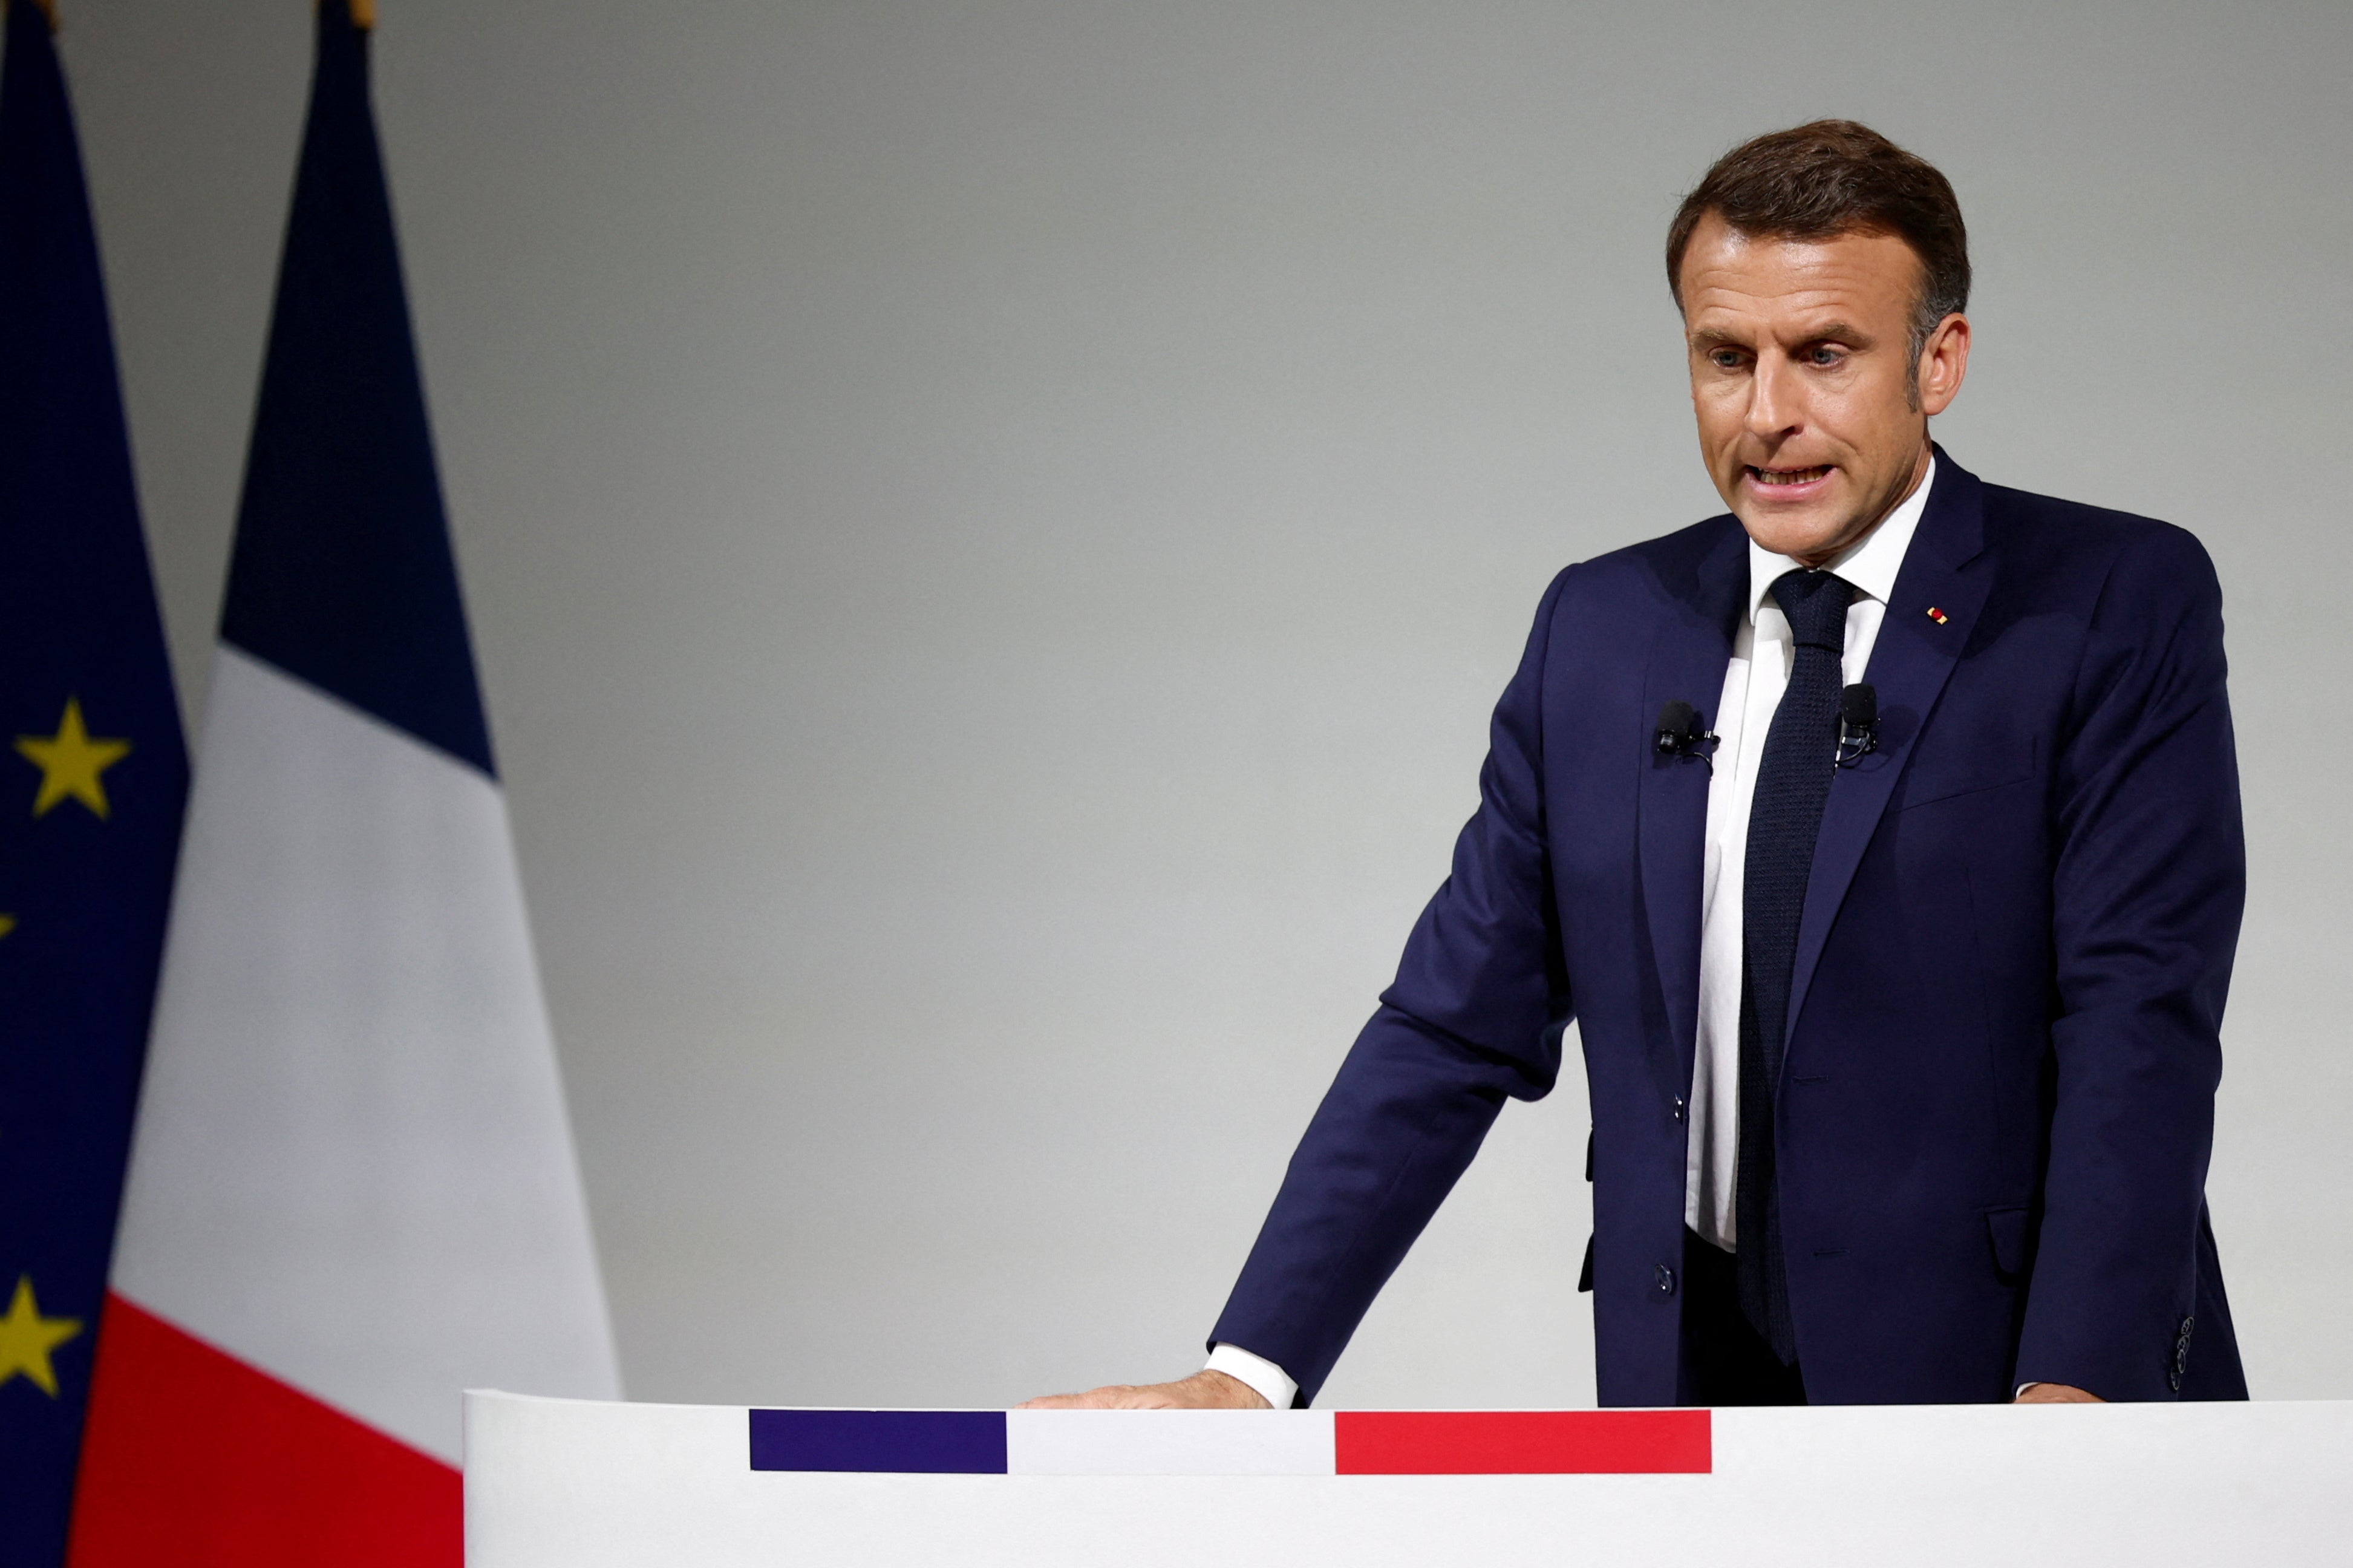 French president Emmanuel Macron speaks during his press conference